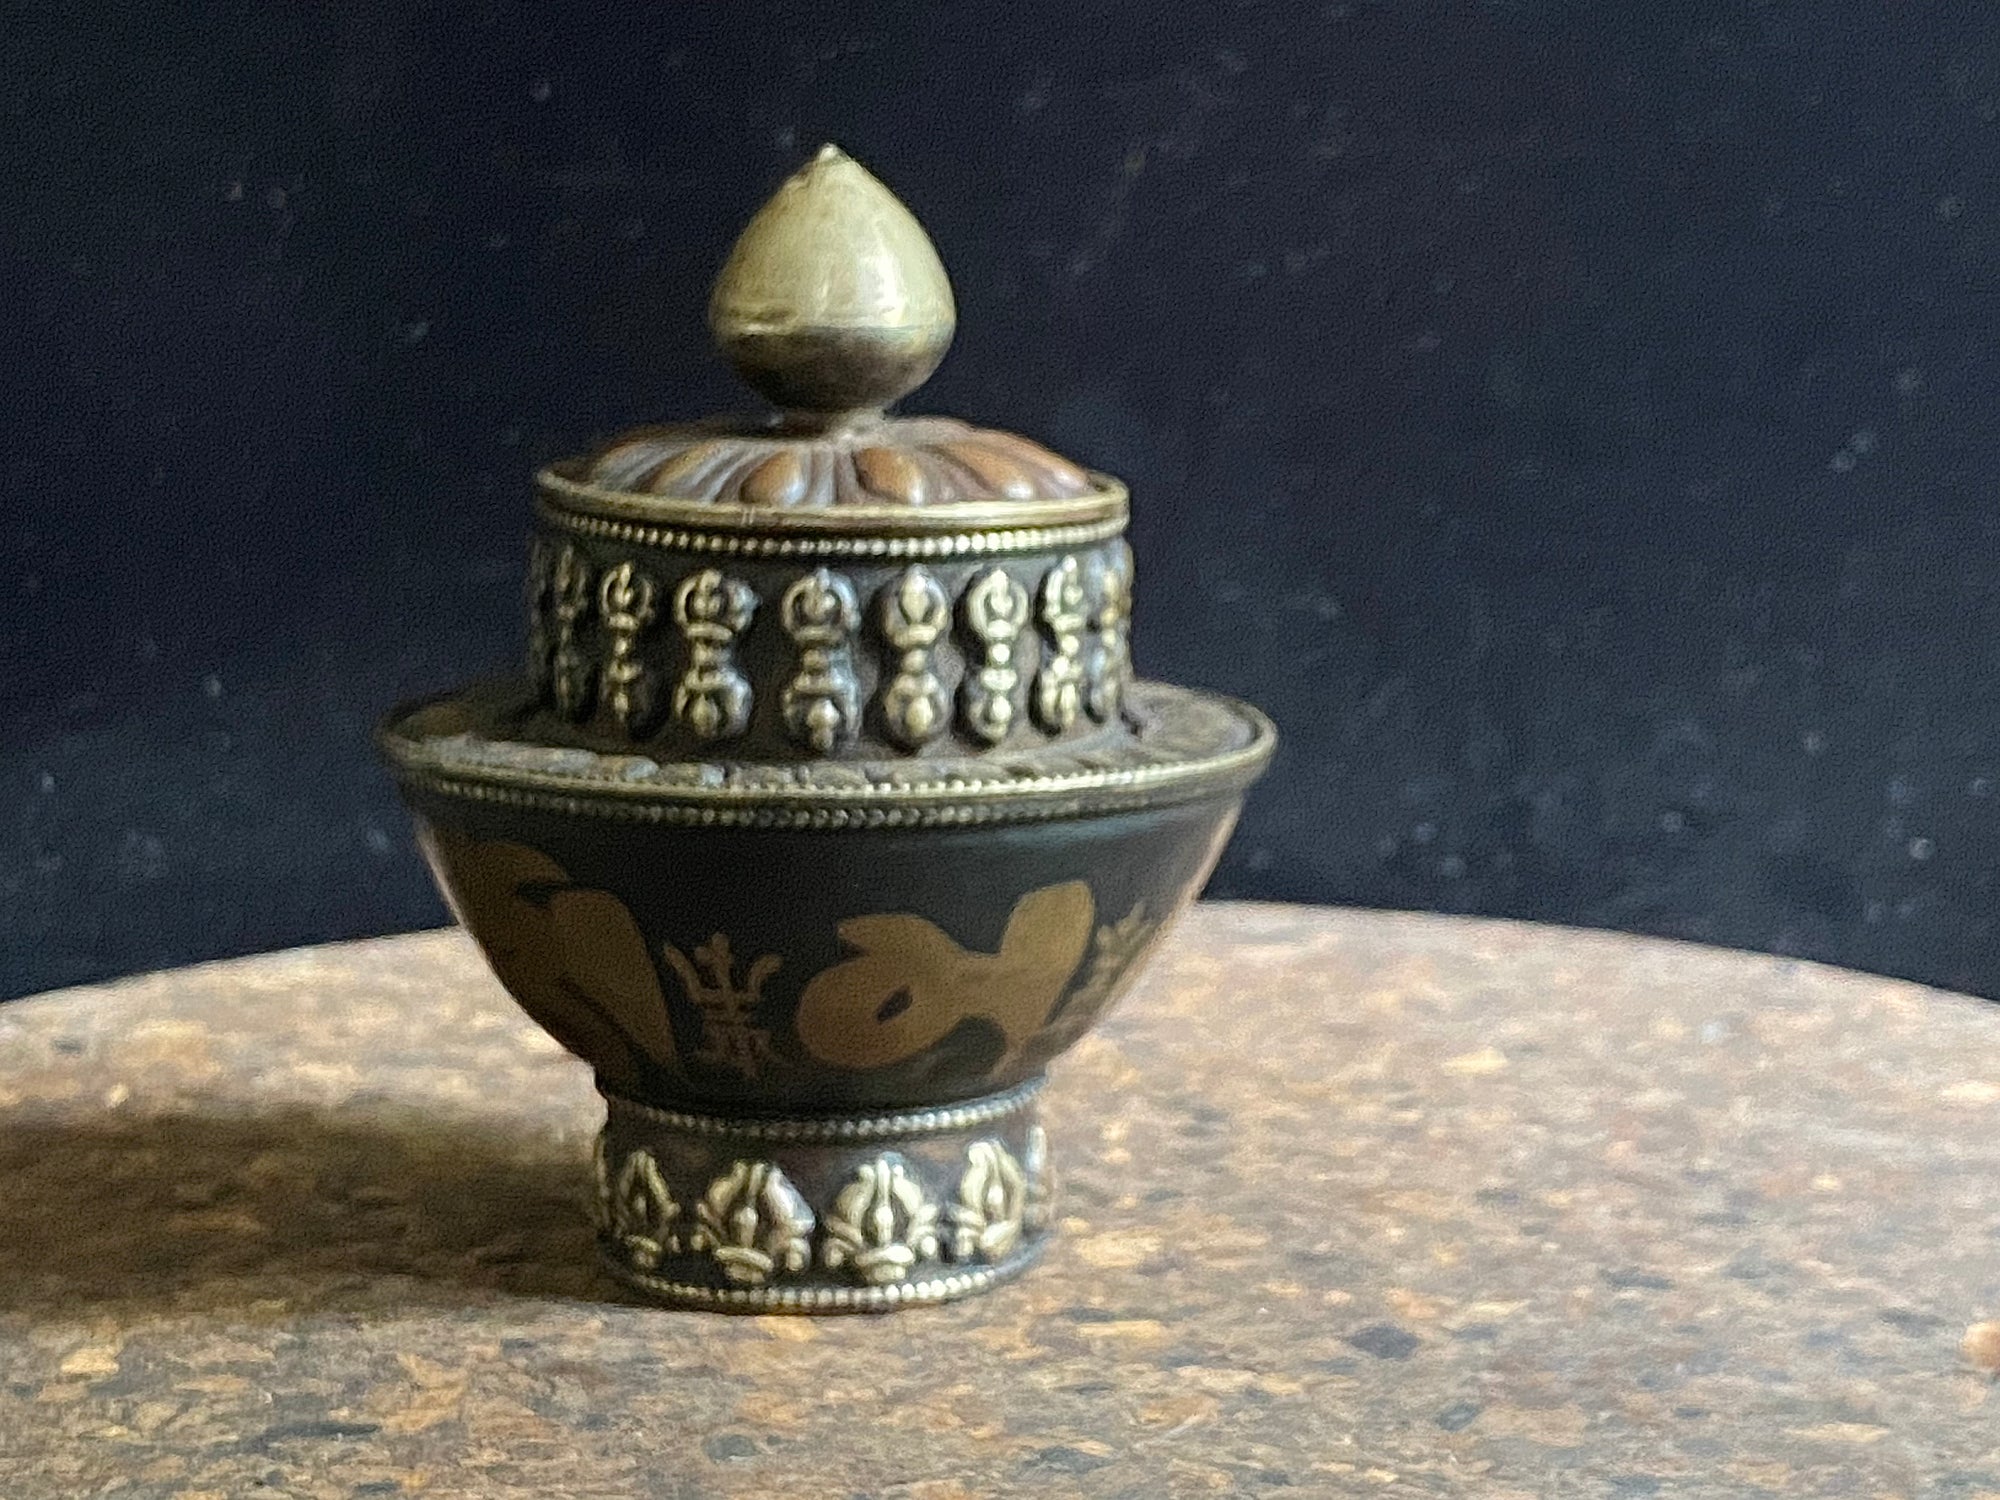 Brass, copper and white metal shaped pot with lid - incense burner, offering bowl or trinket bowl. Topped with a representation of a lotus bud, ringed with dorjes, the mantra Om Mani Padme Hum  and a border of Golden Fish (one of the Eight Auspicious Symbols representing good fortune). Height 11 cm x 8 cm